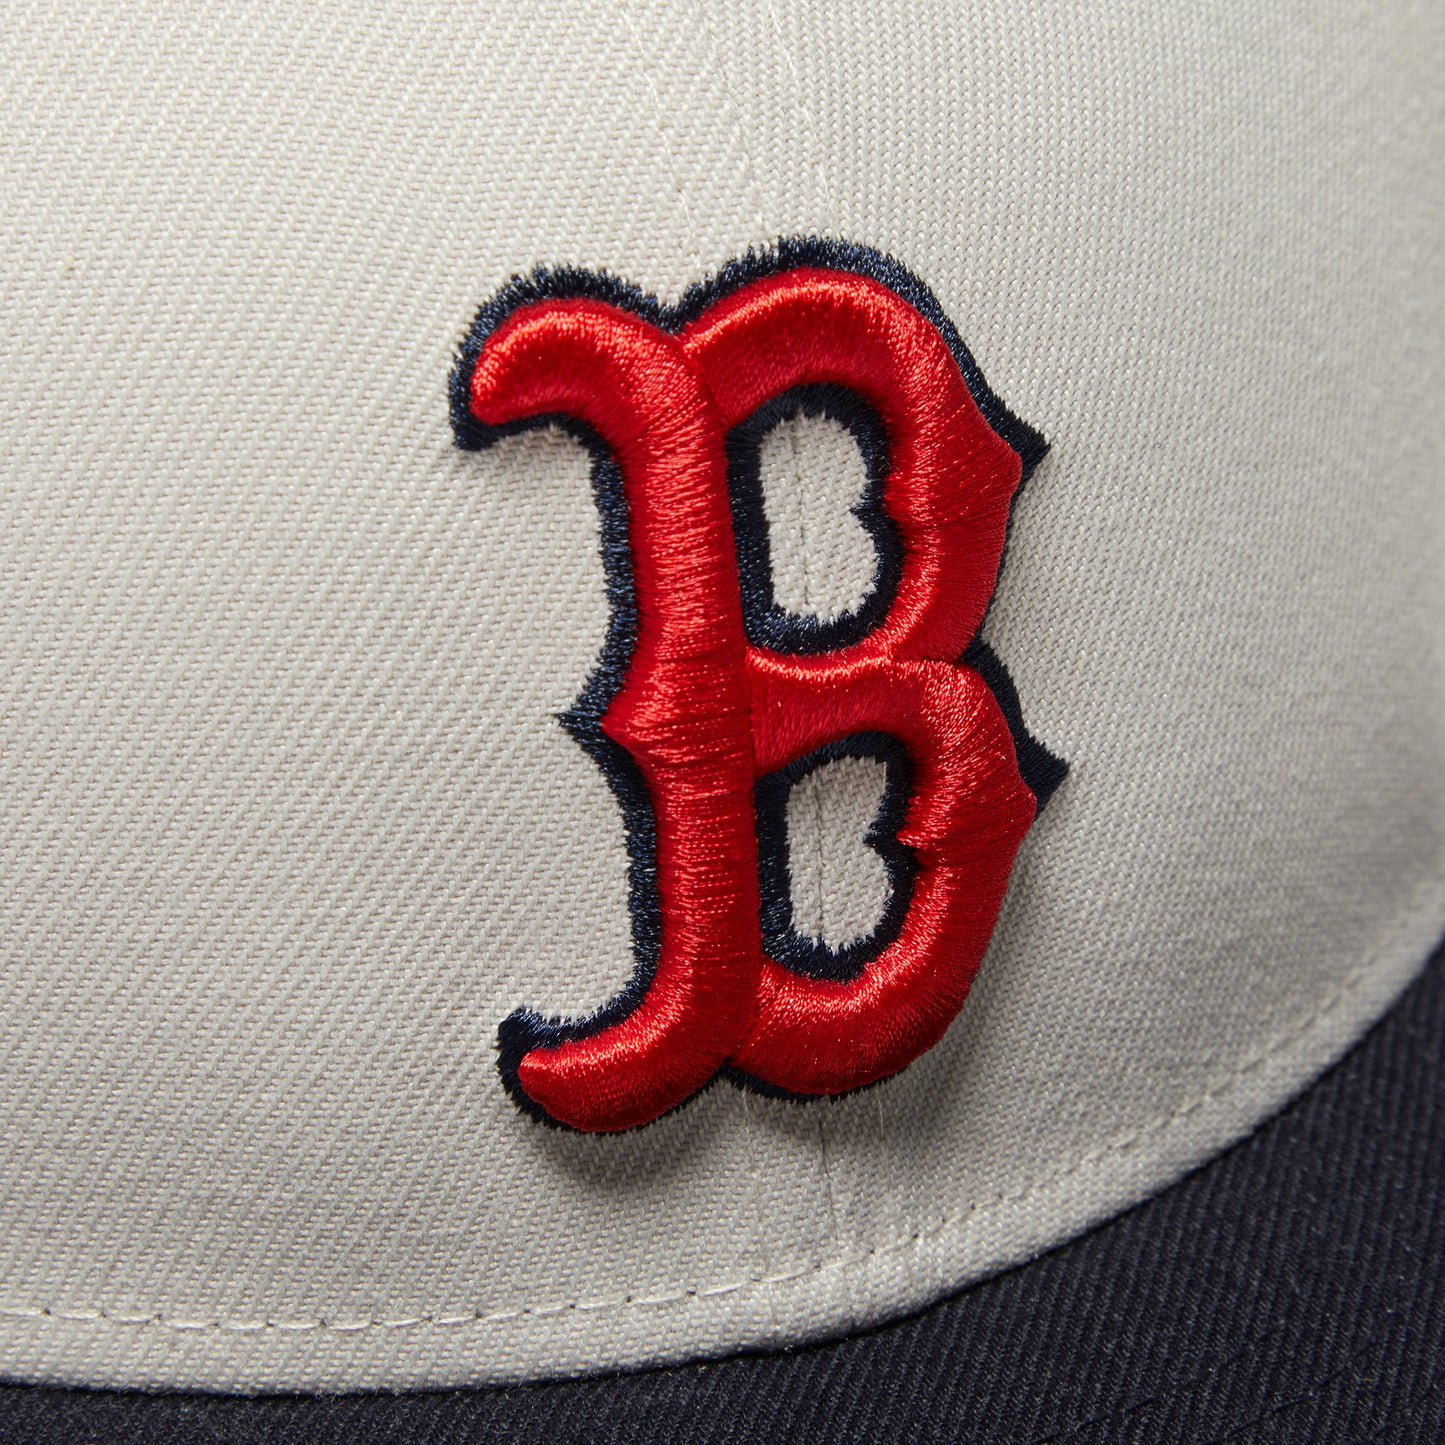 New Era Boston Red Sox 59Fifty Fitted Hat (White/Navy)